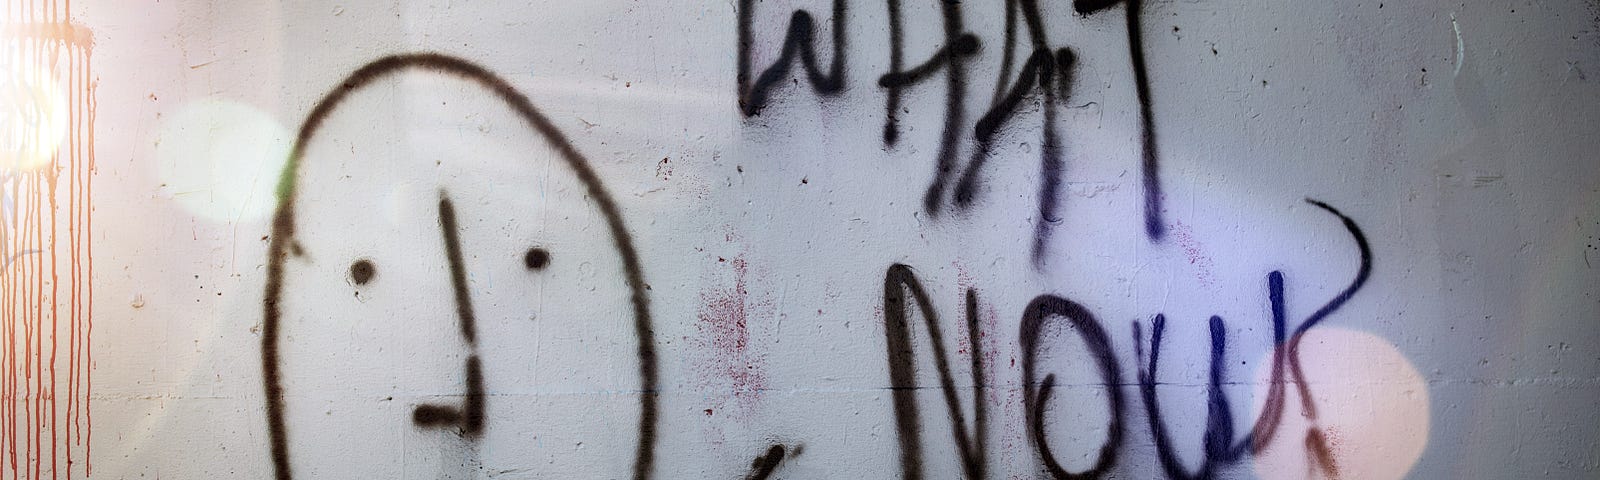 Graffiti with staid face and “What Now?” spray painted on the the wall of an abandoned building.